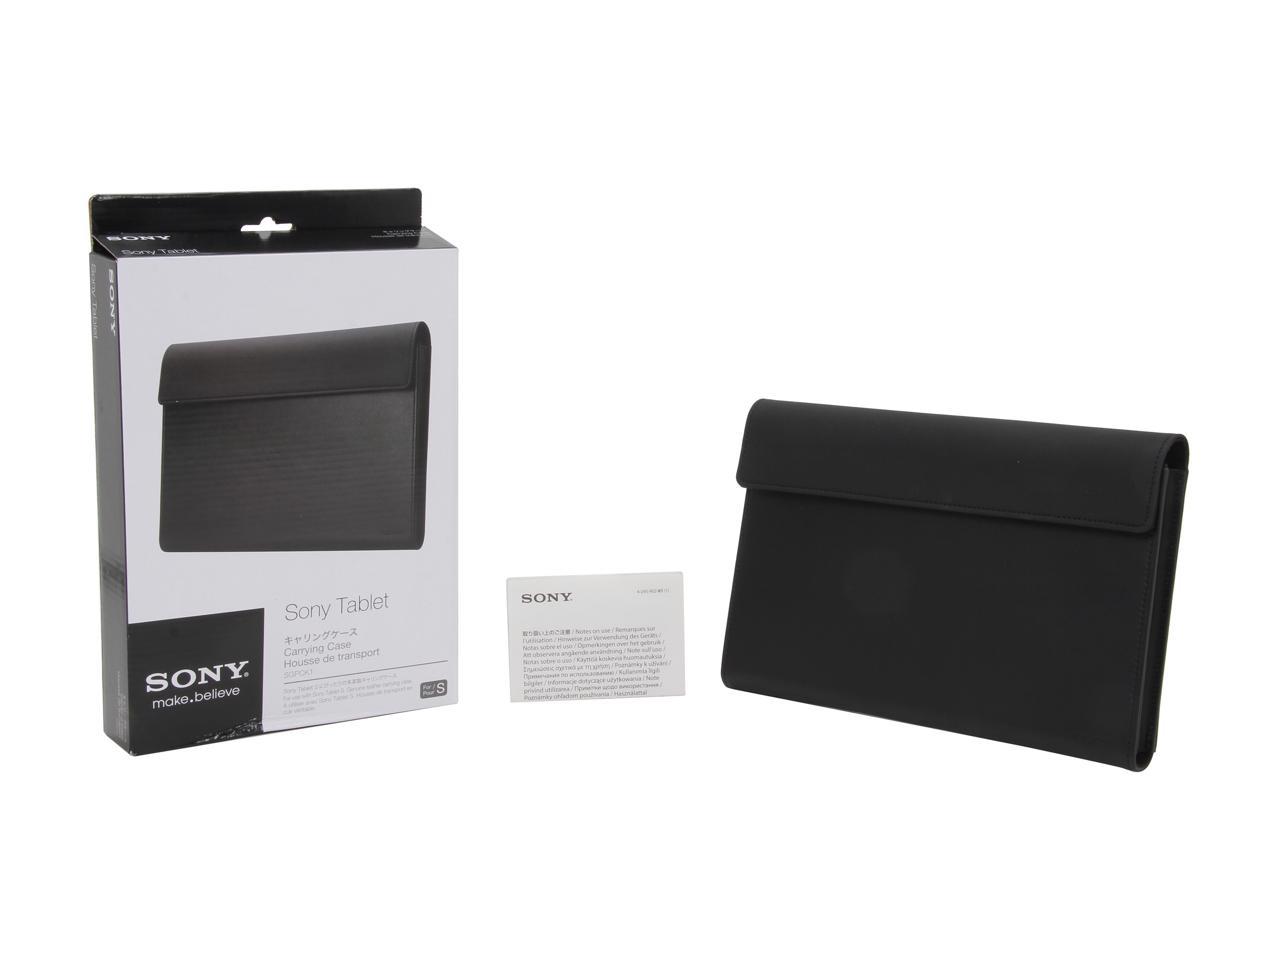 SONY VAIO Black TabletS Leather Carrying Case Model SGPCK1 - Newegg.com